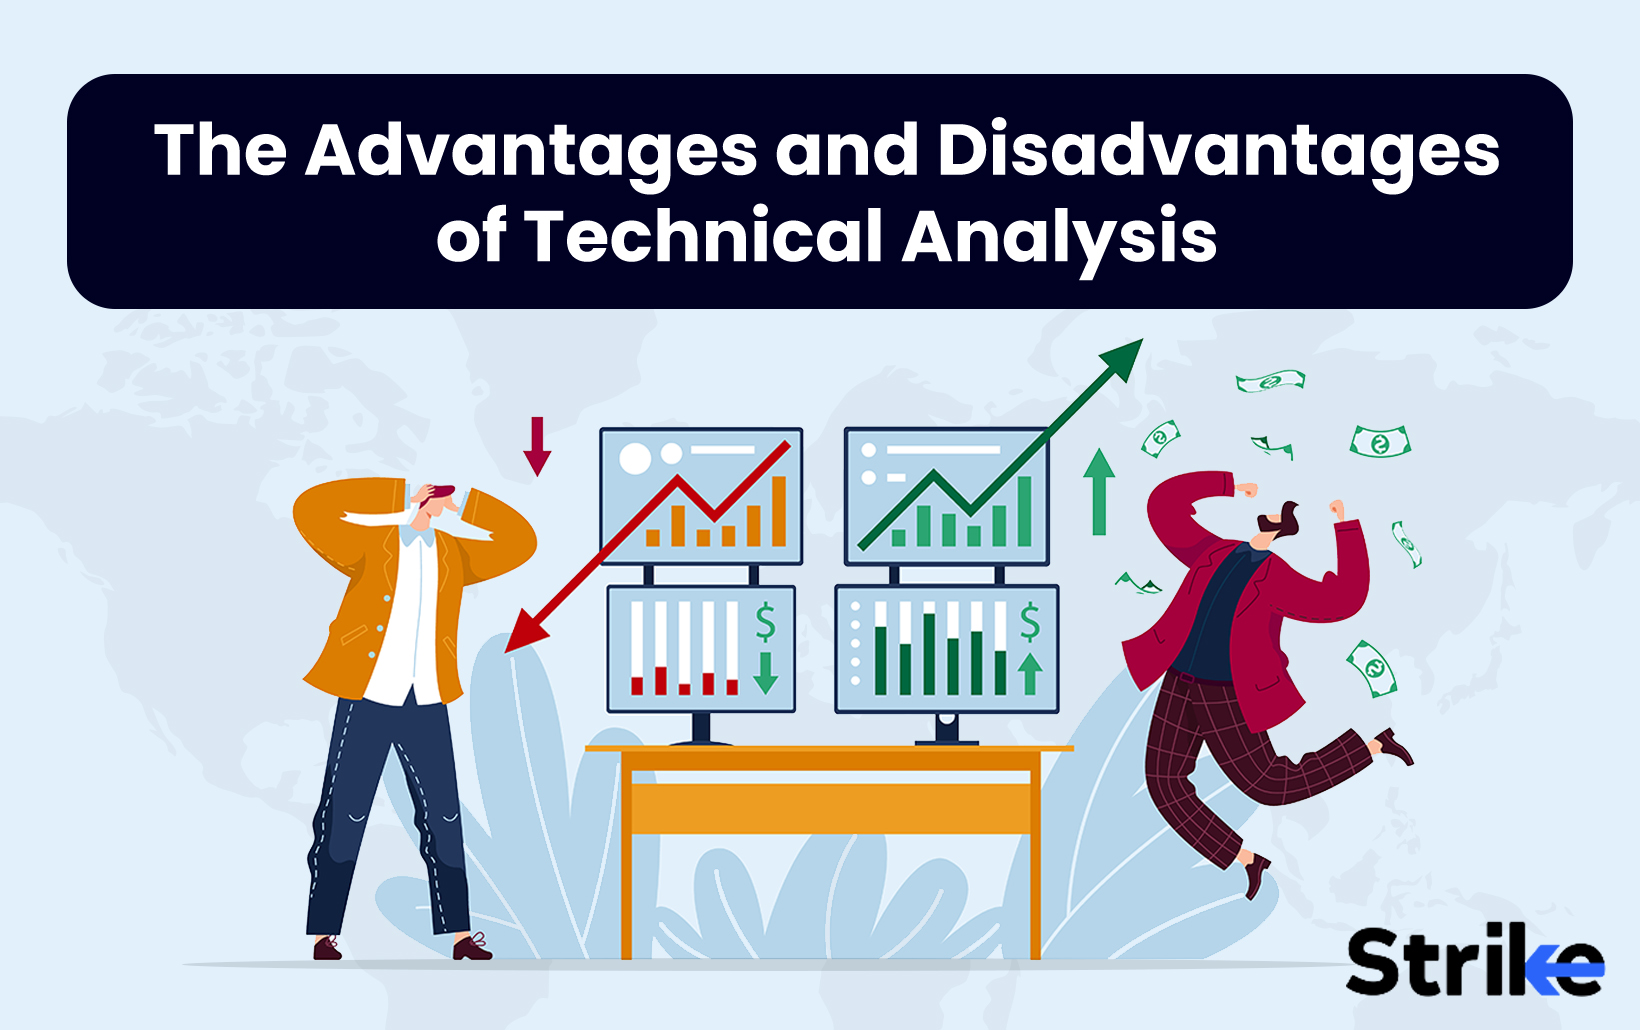 The Advantages and Disadvantages of Technical Analysis